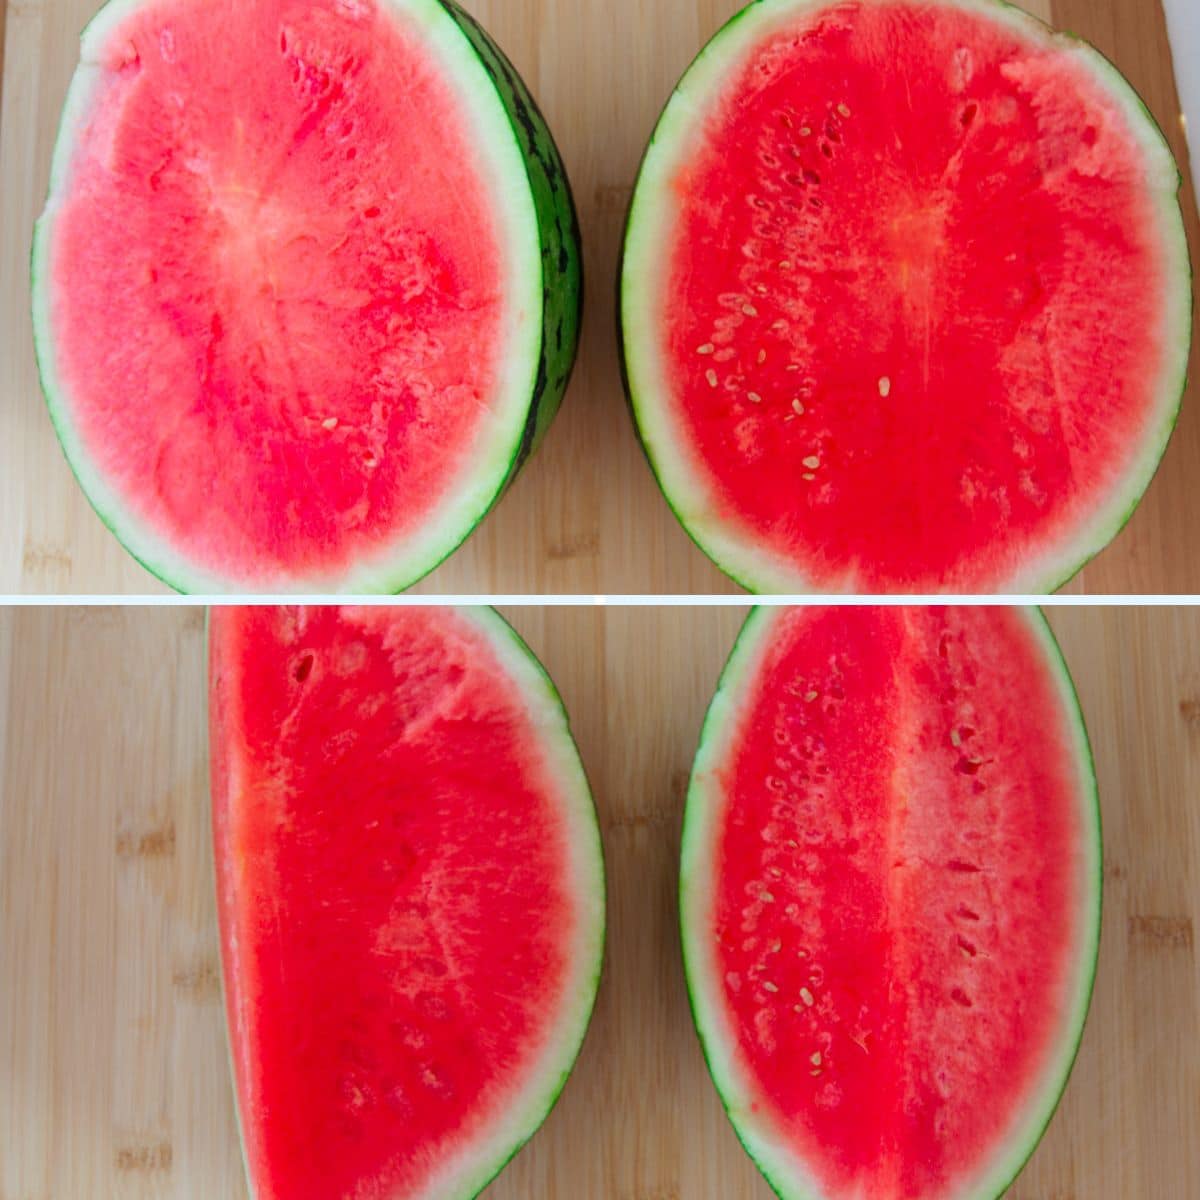 college of 2 images with half cut watermelon on top and 2 pieces of quartered watermelon in bottom image.